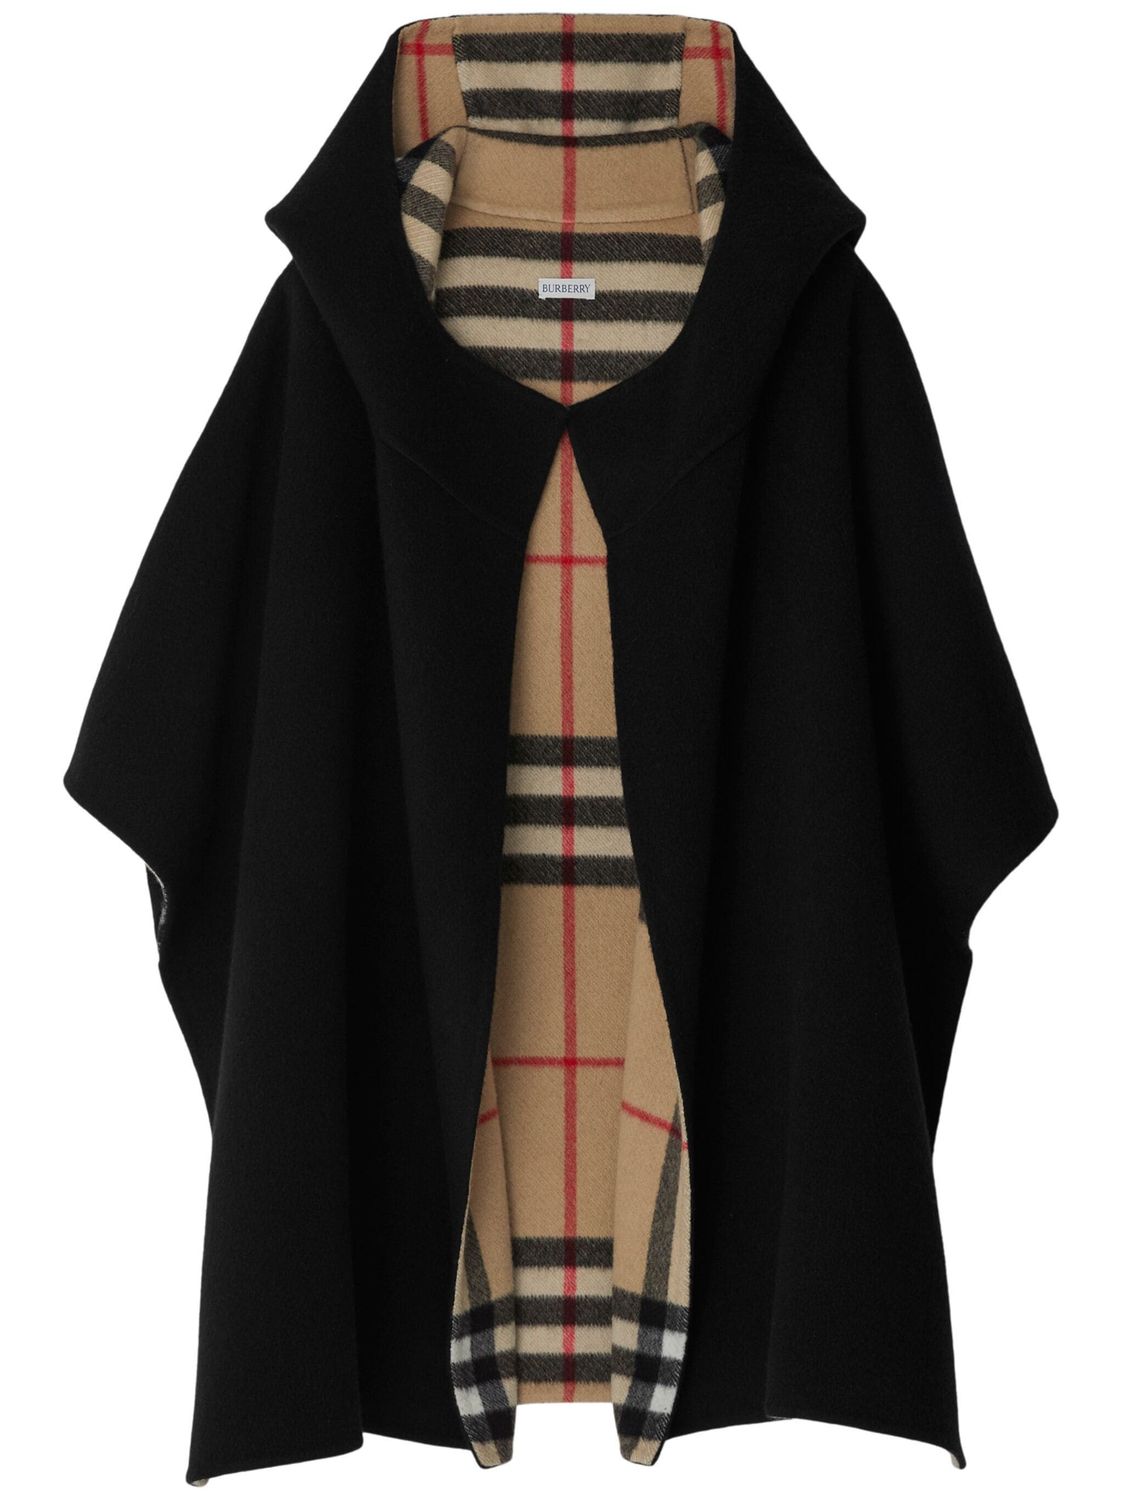 BURBERRY Women's Reversible Cashmere Cape with Hood and Check Motif - Black